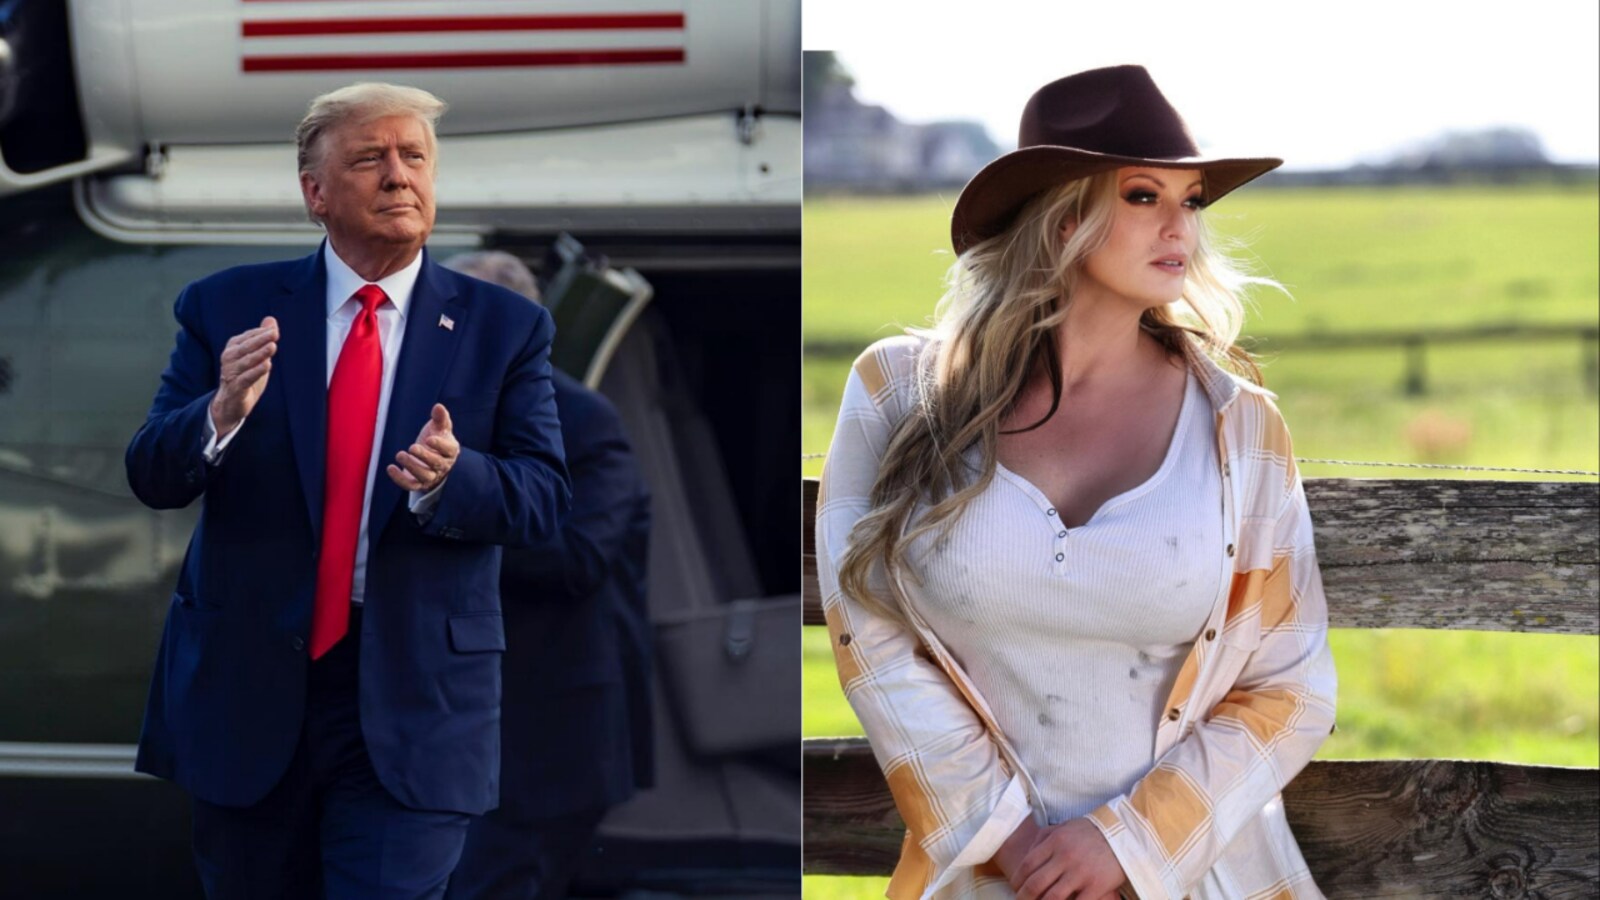 Sex For Money Brazzers - Donald Trump-Stormy Daniels scandal: A porn star, a president and hush money